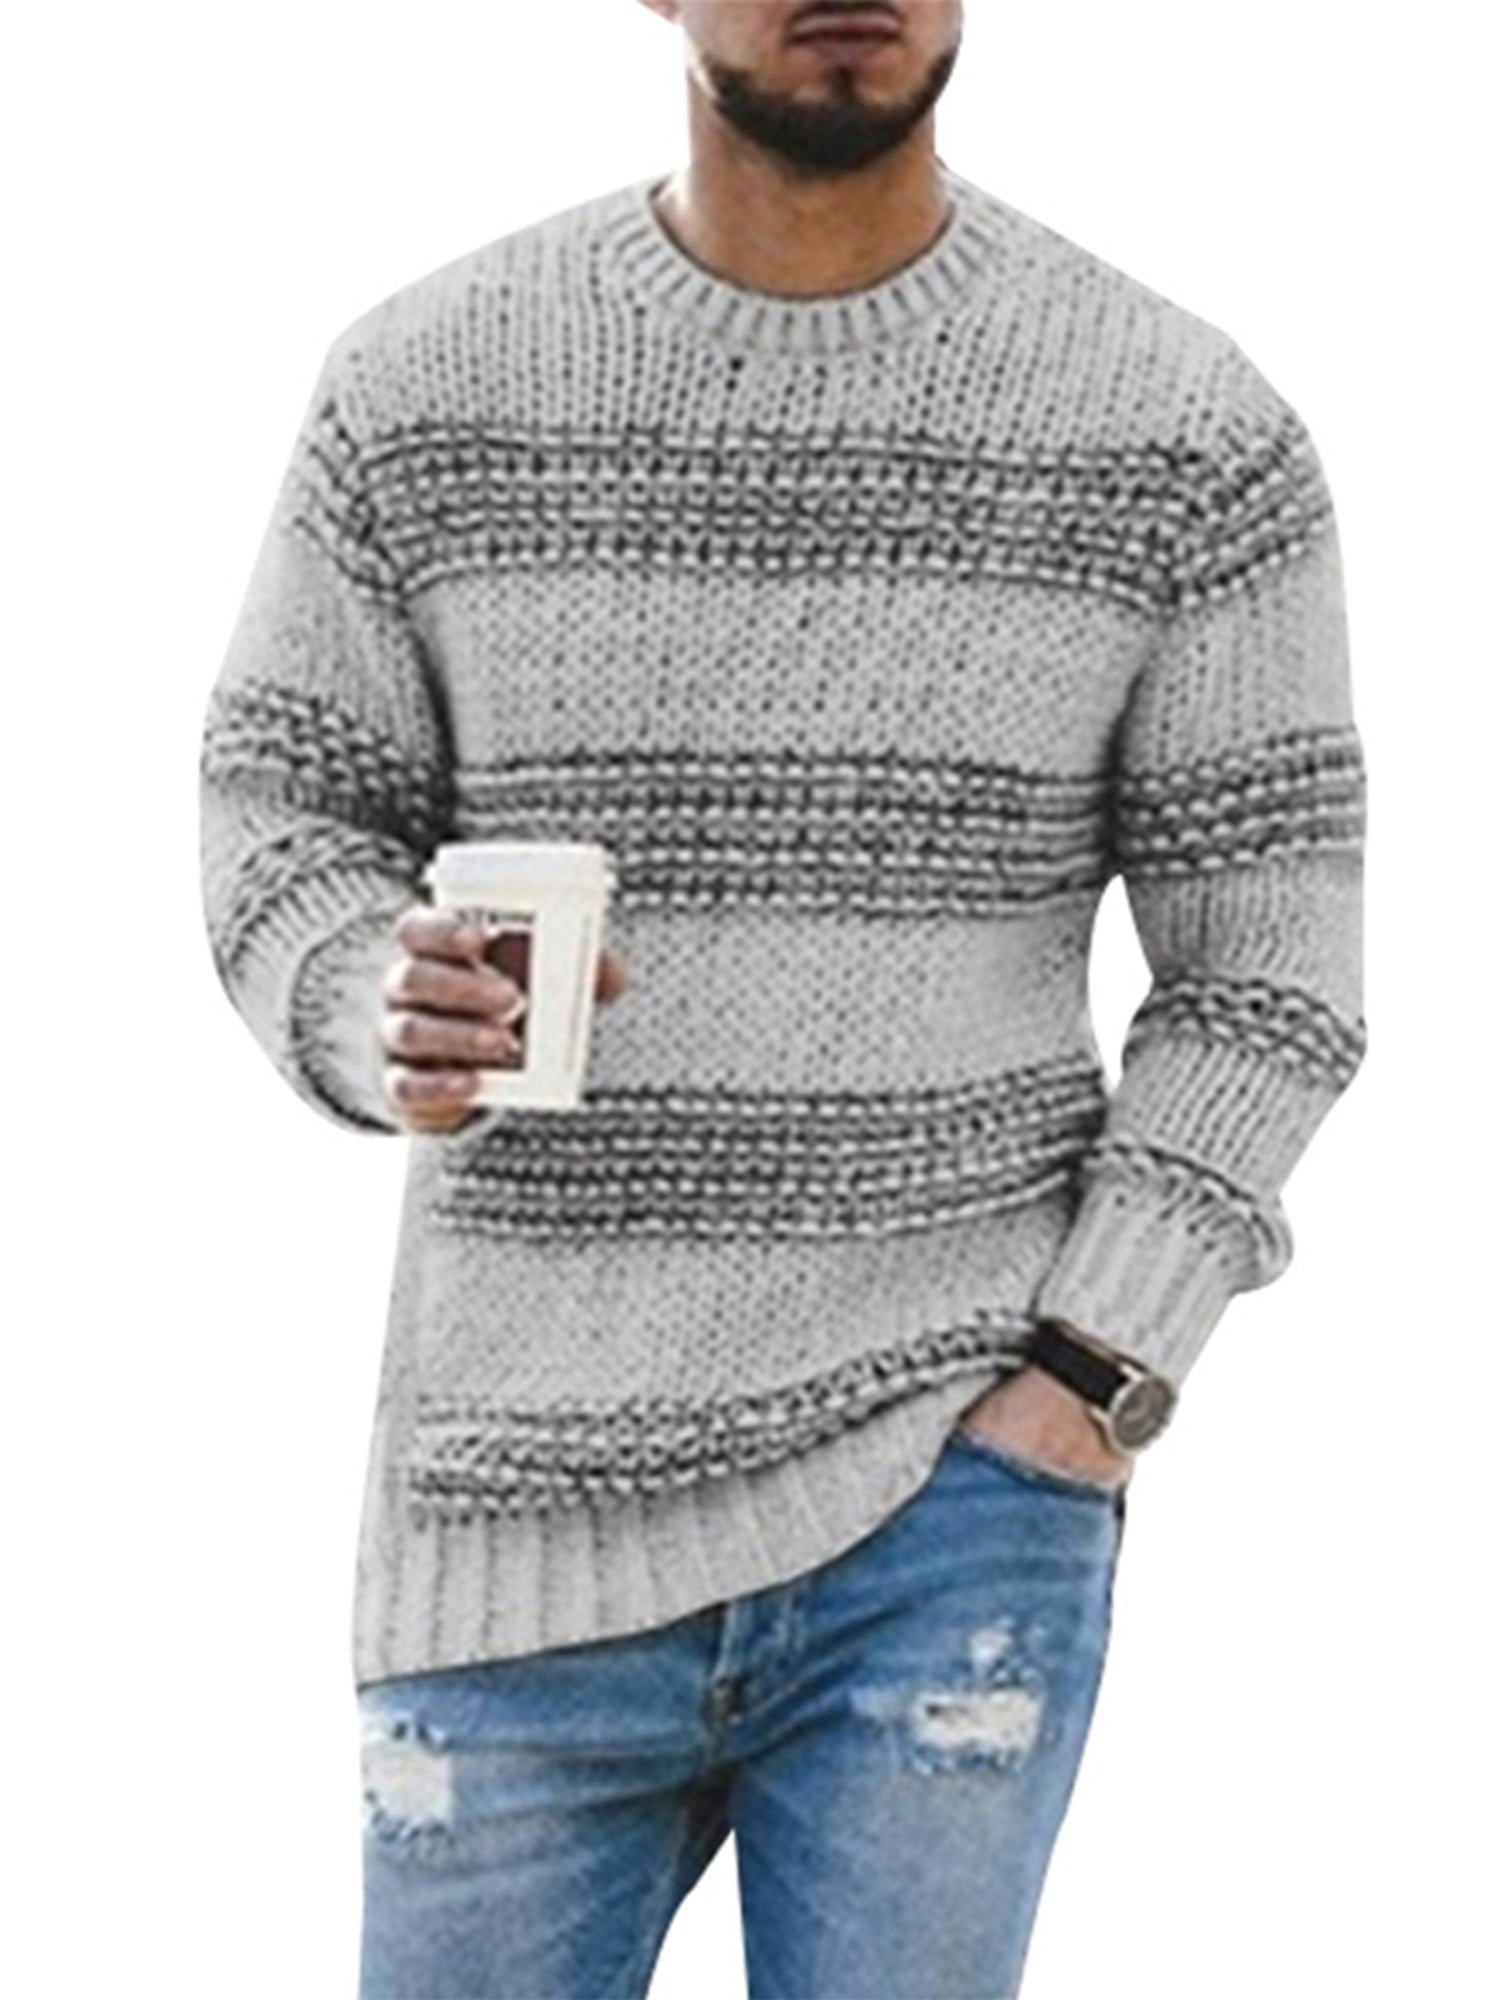 Frontwalk Winter Sweater for Men Striped Splicing Casual Knit Tops ...